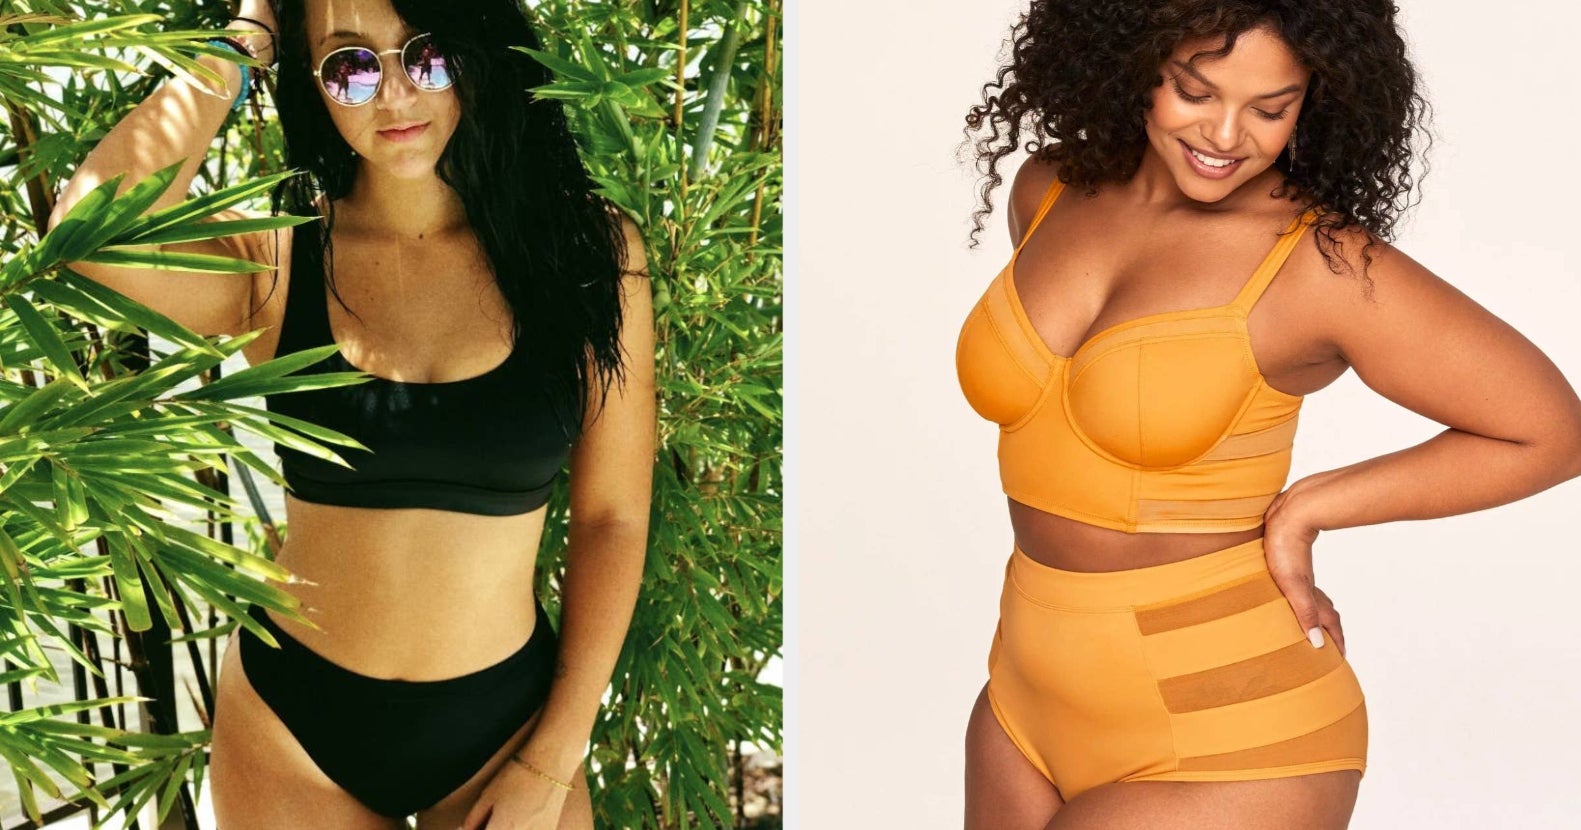 Look: 10 Bikini Styles For Girls With Bigger Breasts